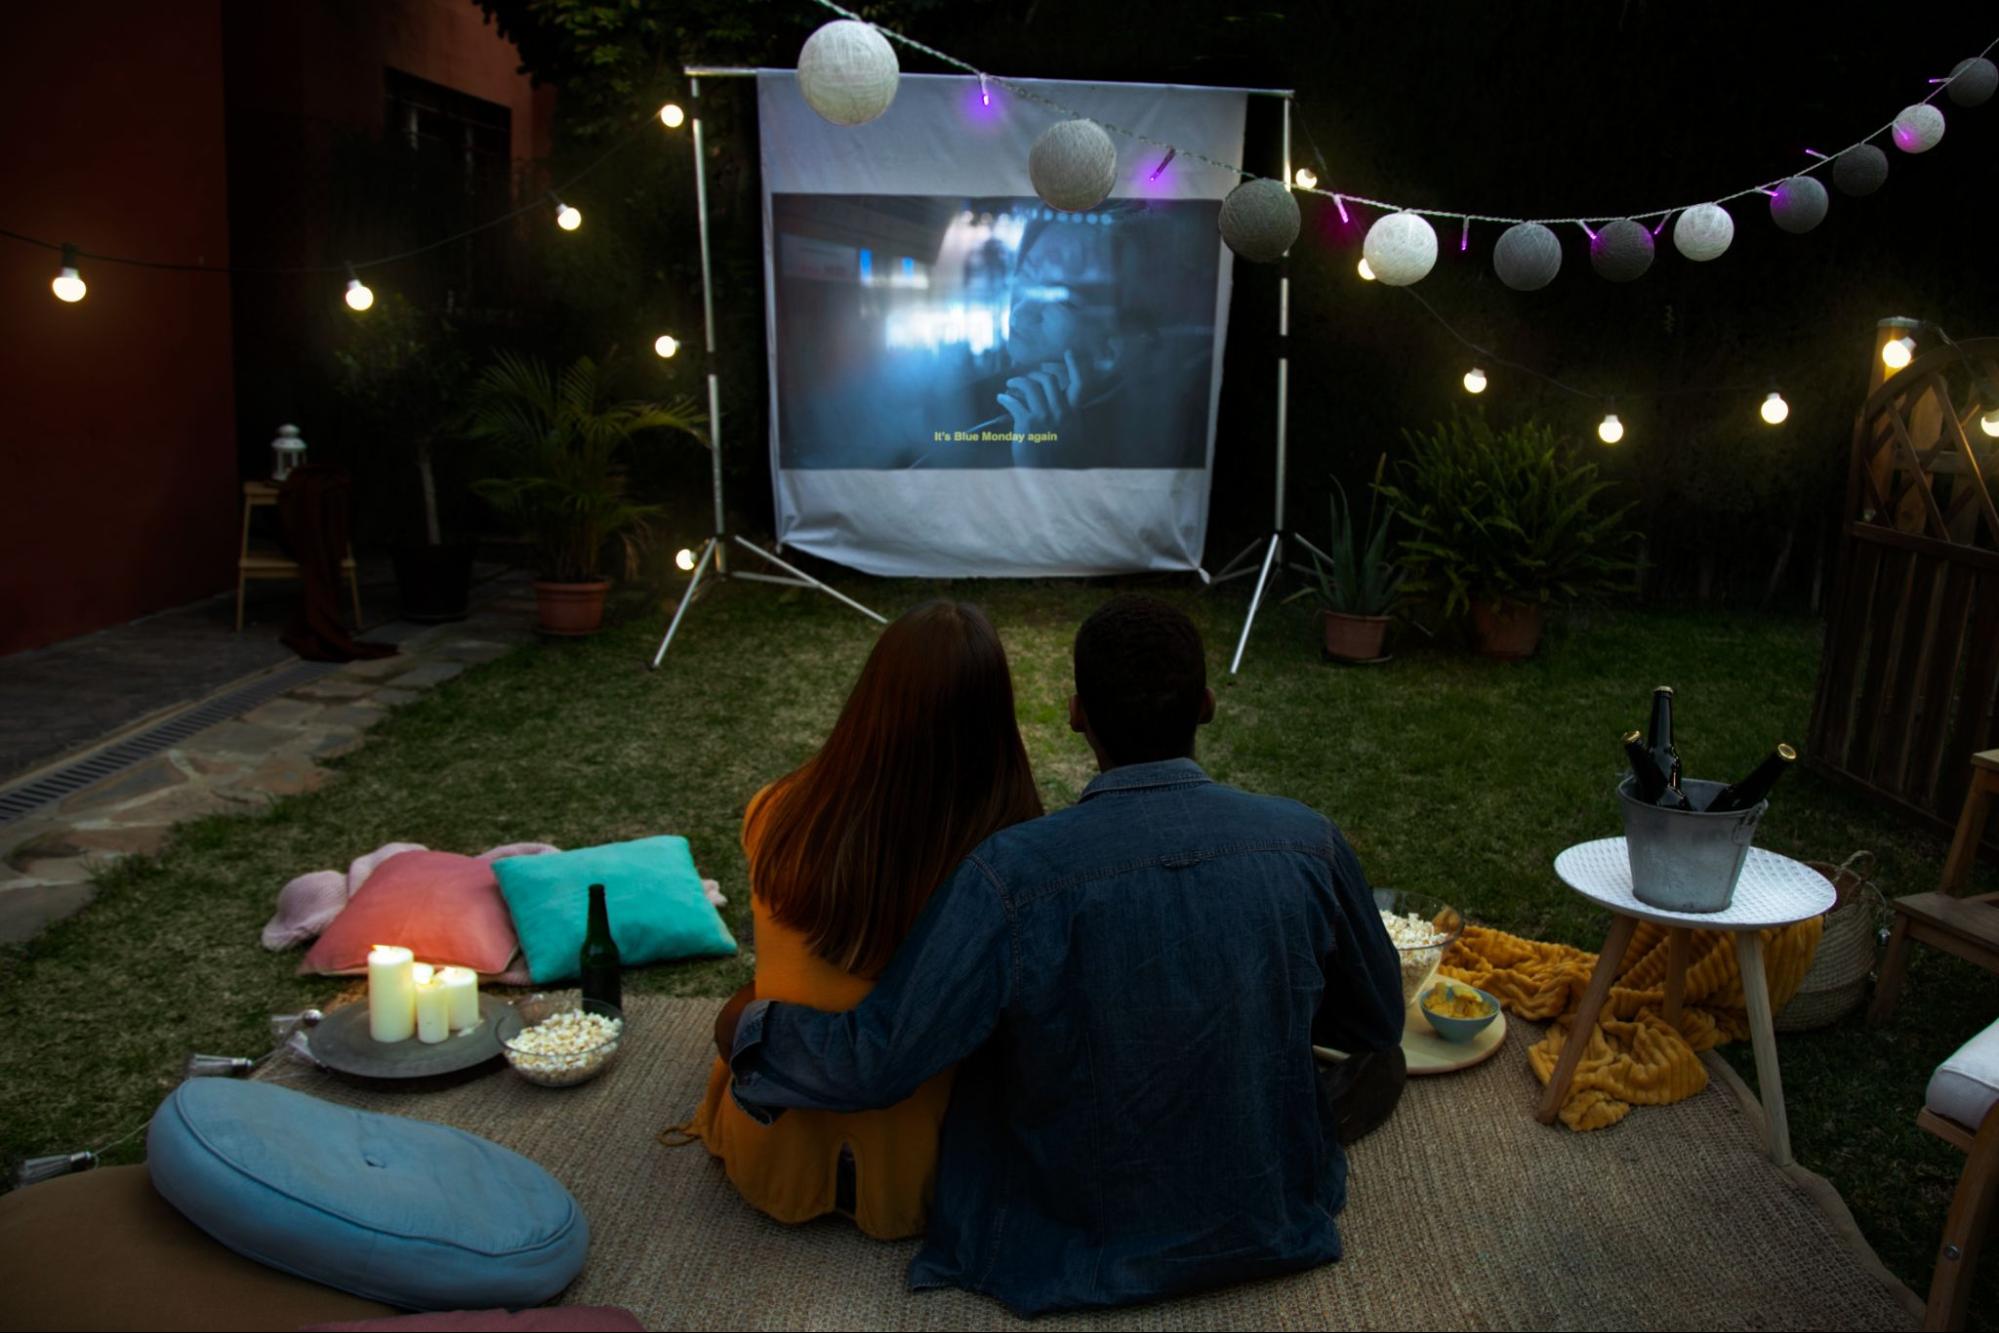 Outdoor Movie Night: Transform Your Home into a Cinema for an Unforgettable Birthday Experience